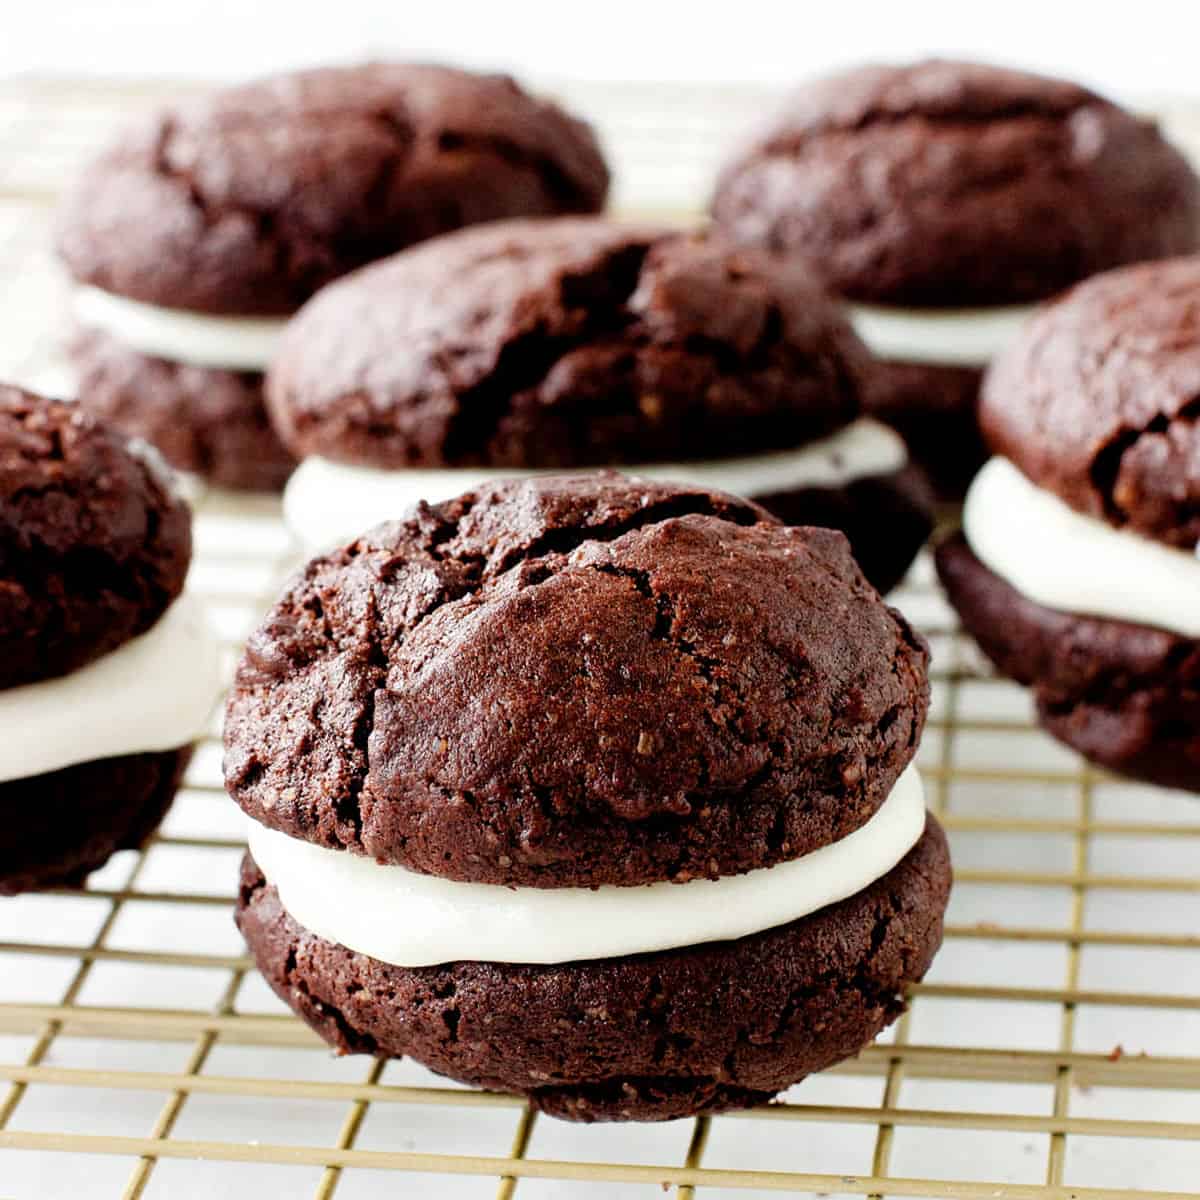 https://vintagekitchennotes.com/wp-content/uploads/2022/07/Whoopie-pies-on-a-wire-rack.jpeg